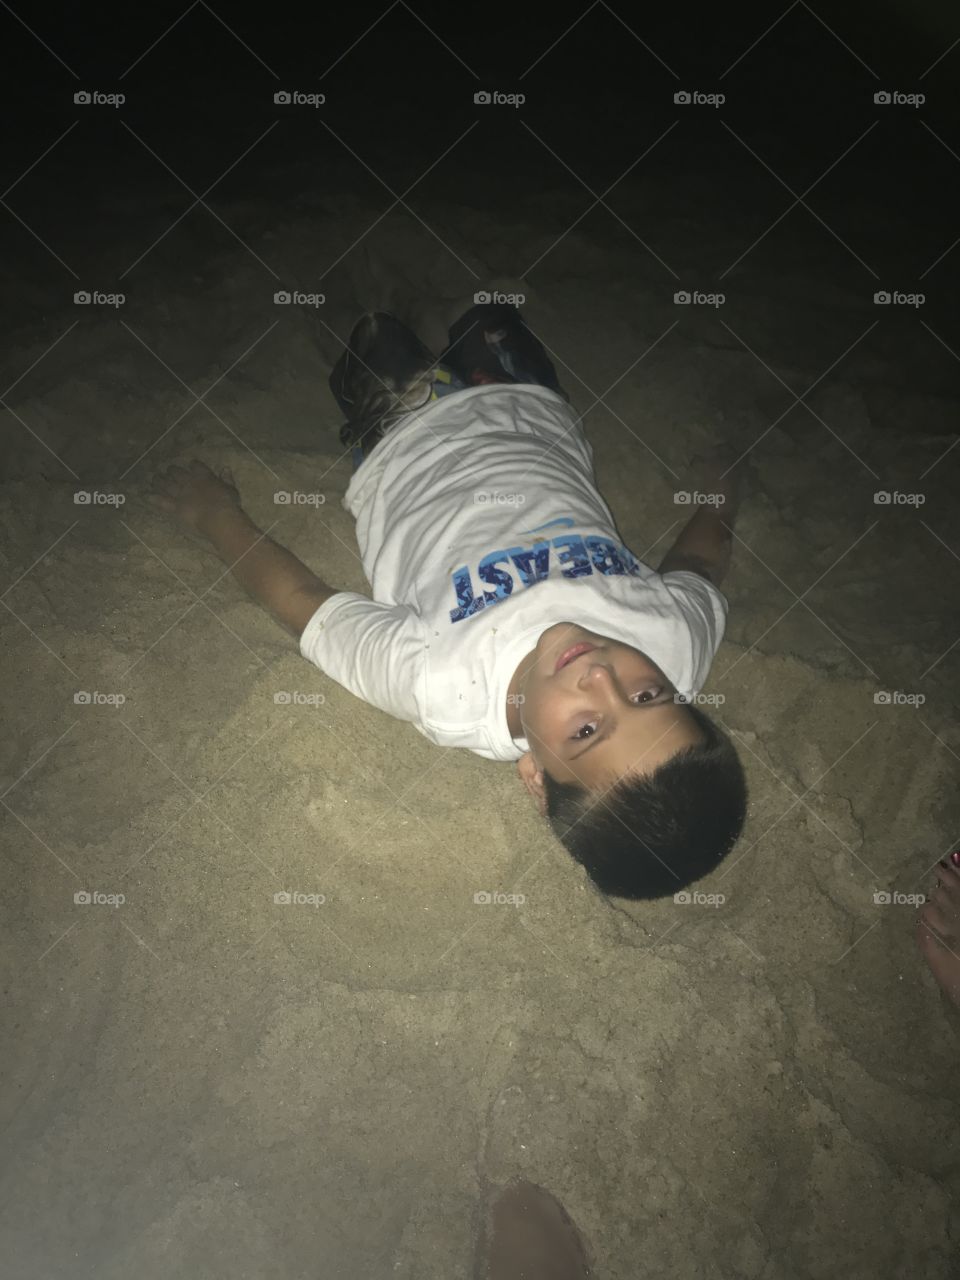 4th July, on his back in the sand waiting for the fireworks!